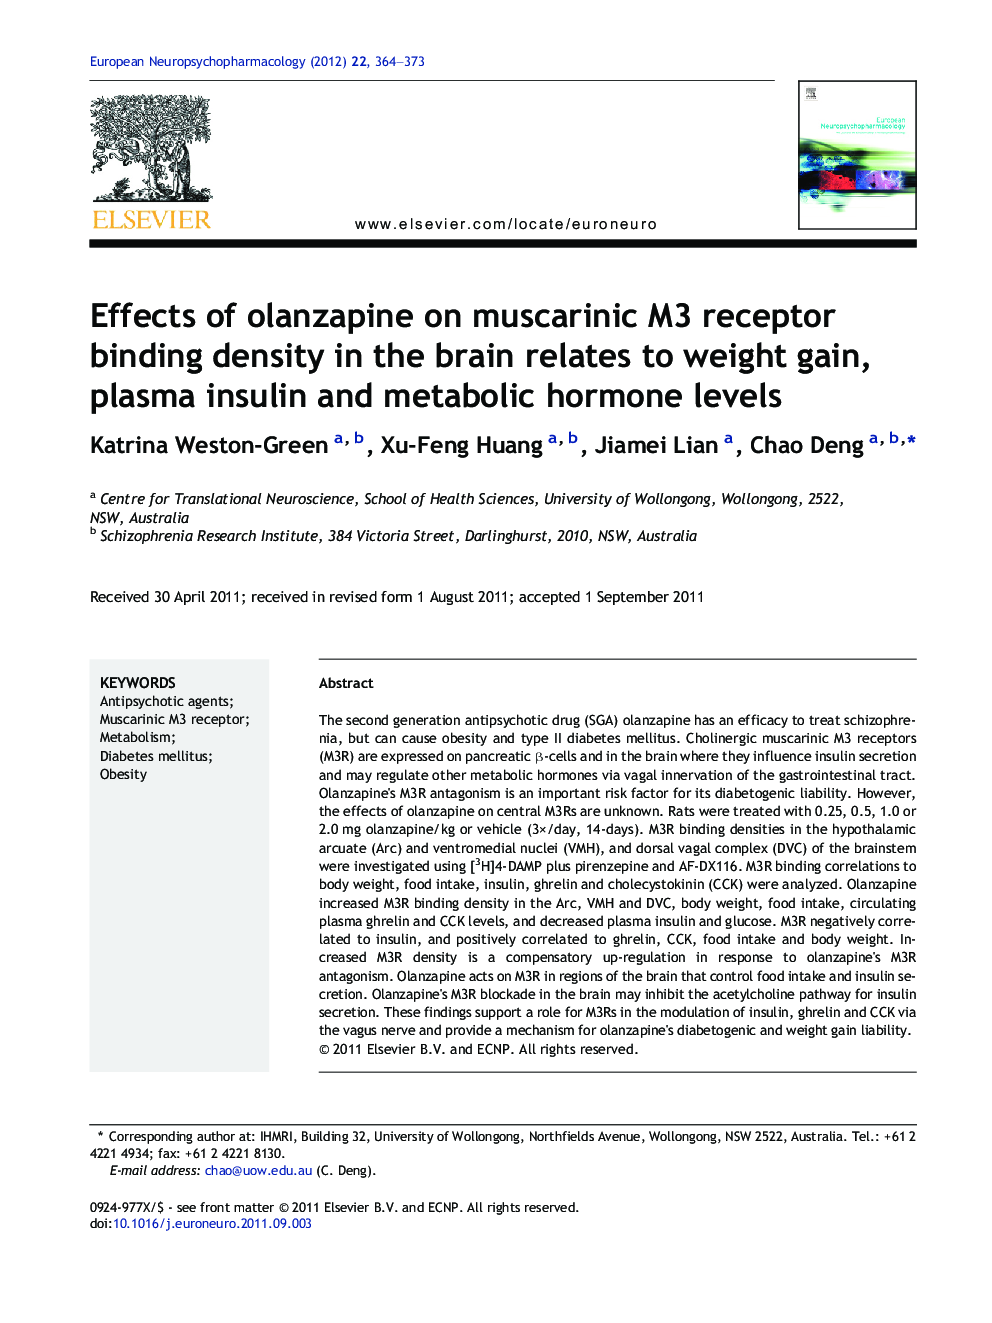 Effects of olanzapine on muscarinic M3 receptor binding density in the brain relates to weight gain, plasma insulin and metabolic hormone levels